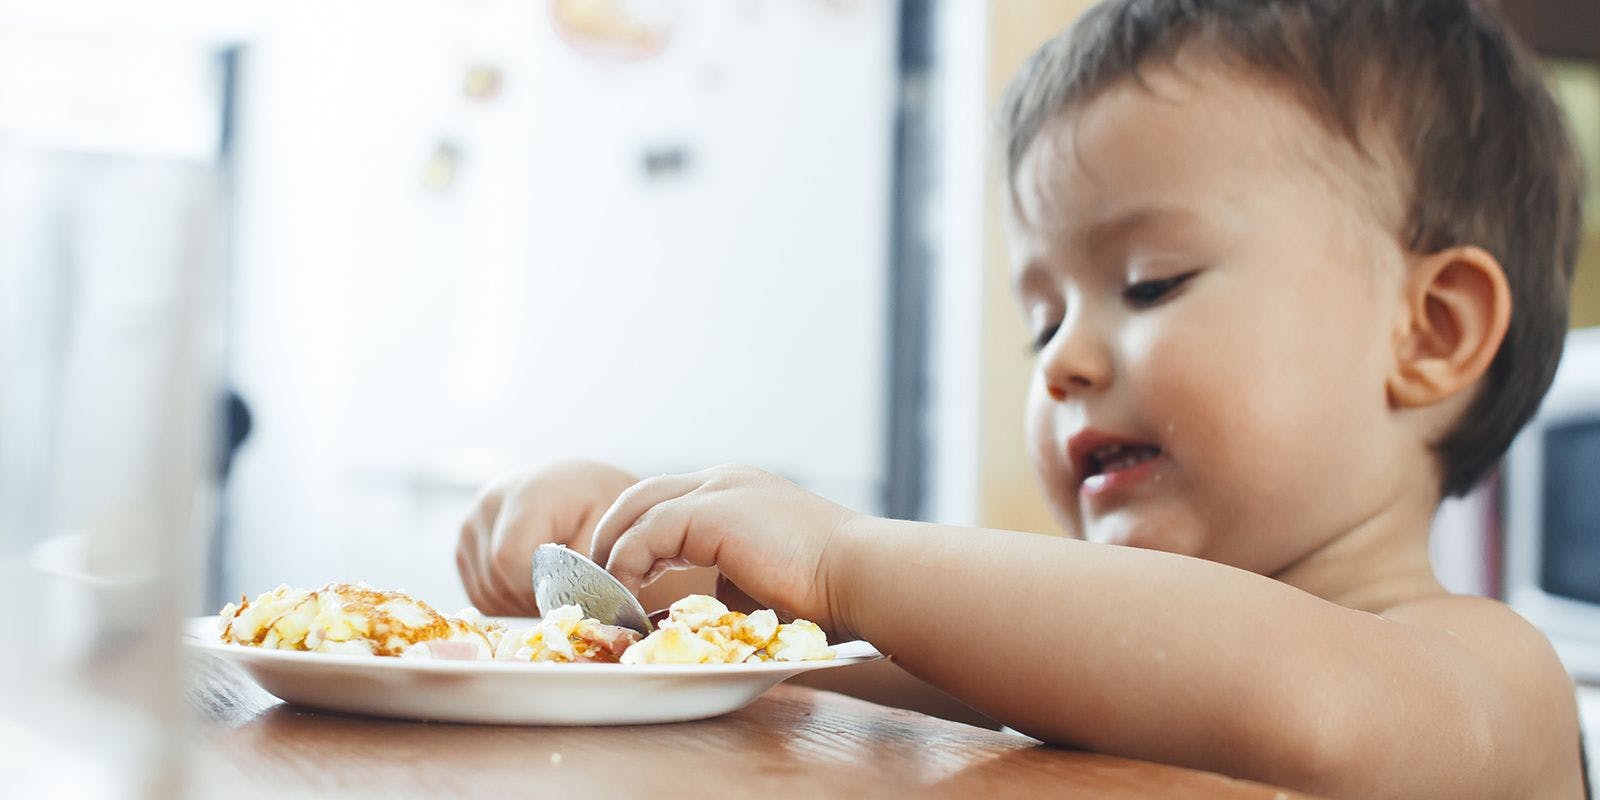 Young child eats a plate of scrambled eggs.